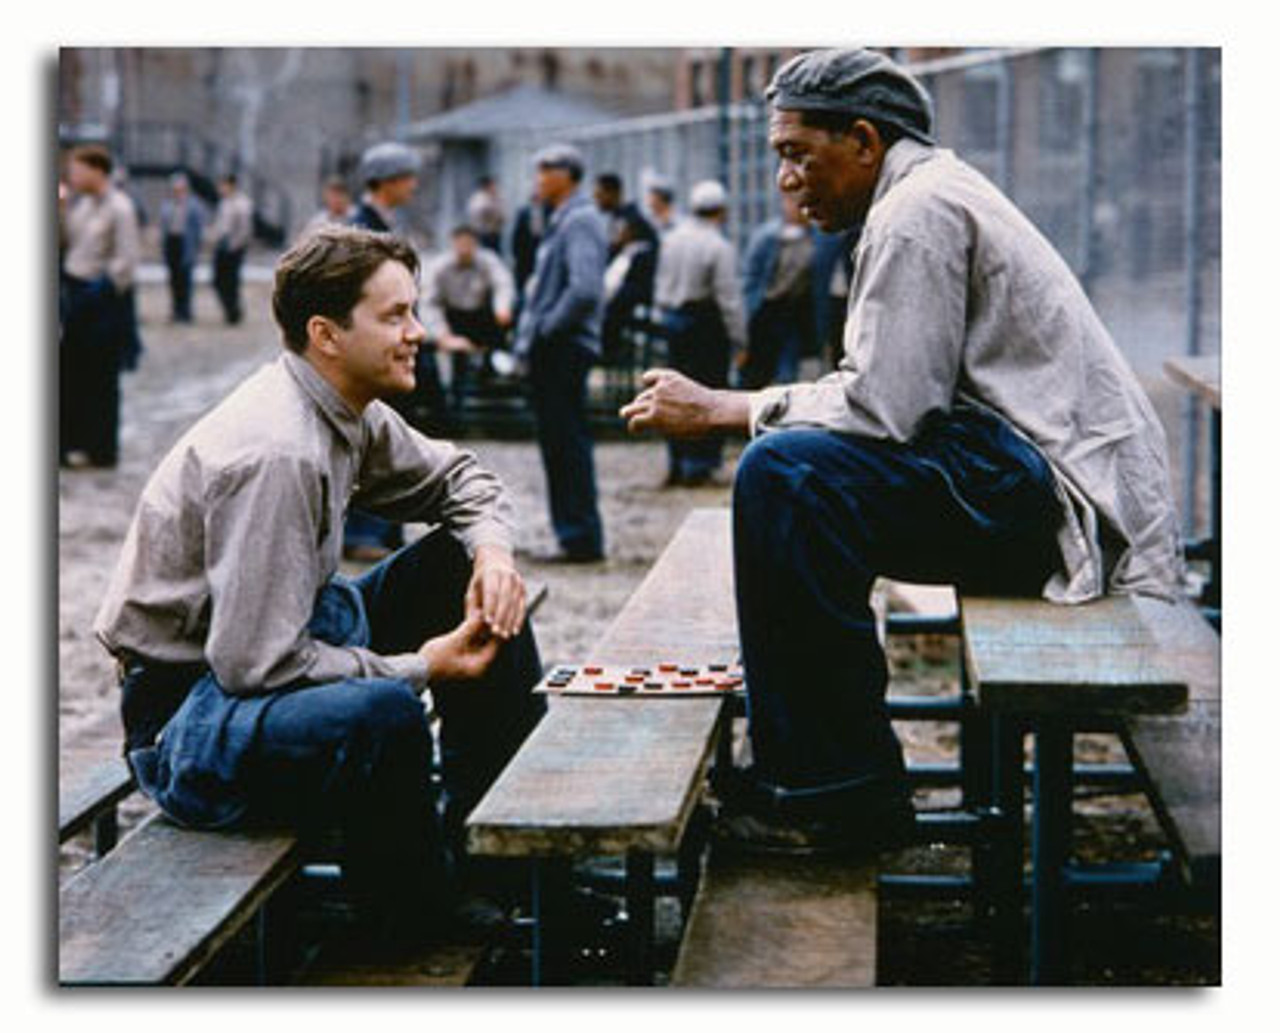 Ss Movie Picture Of The Shawshank Redemption Buy Celebrity Photos And Posters At Starstills Com